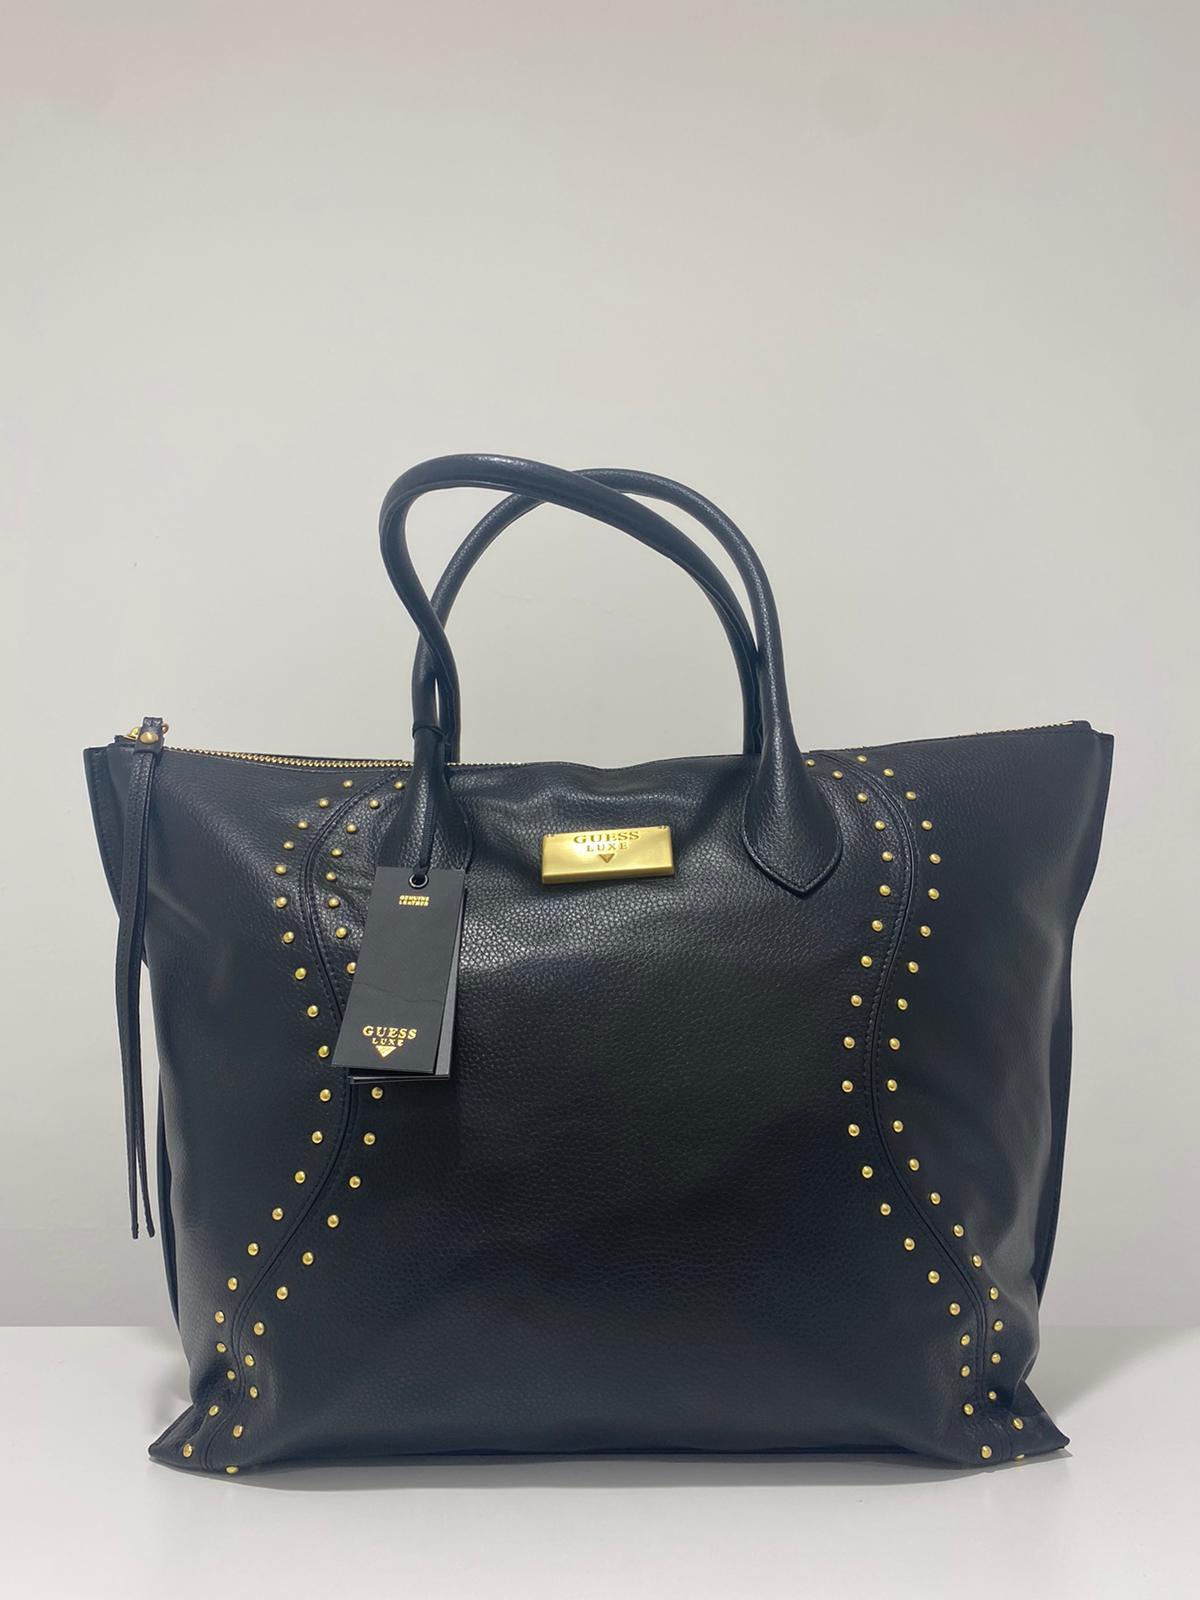 SHOPPING GUESS LUXE PELLE NERO